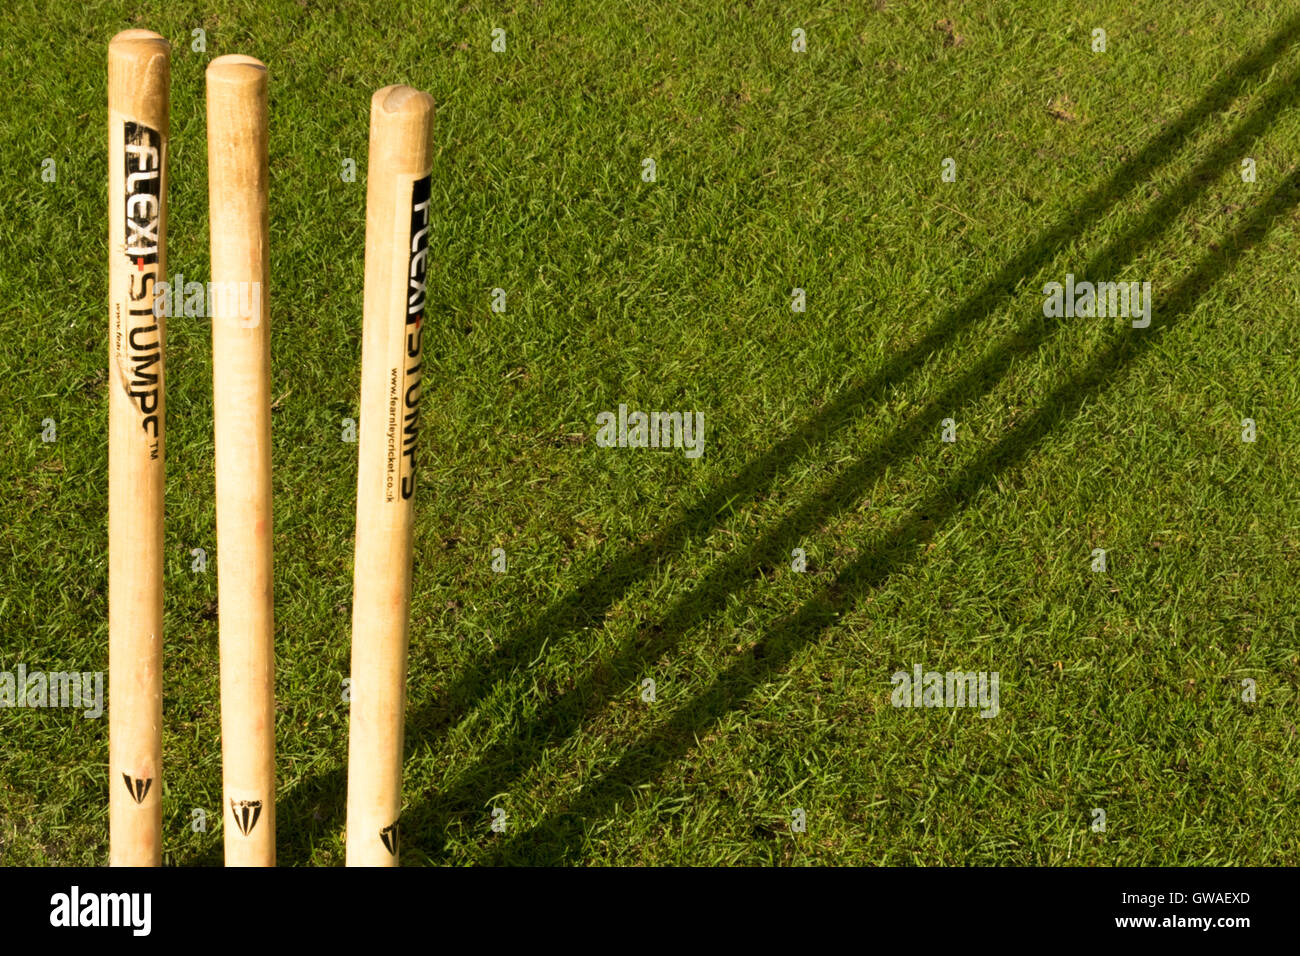 Cricket stumps in evening shadow Stock Photo